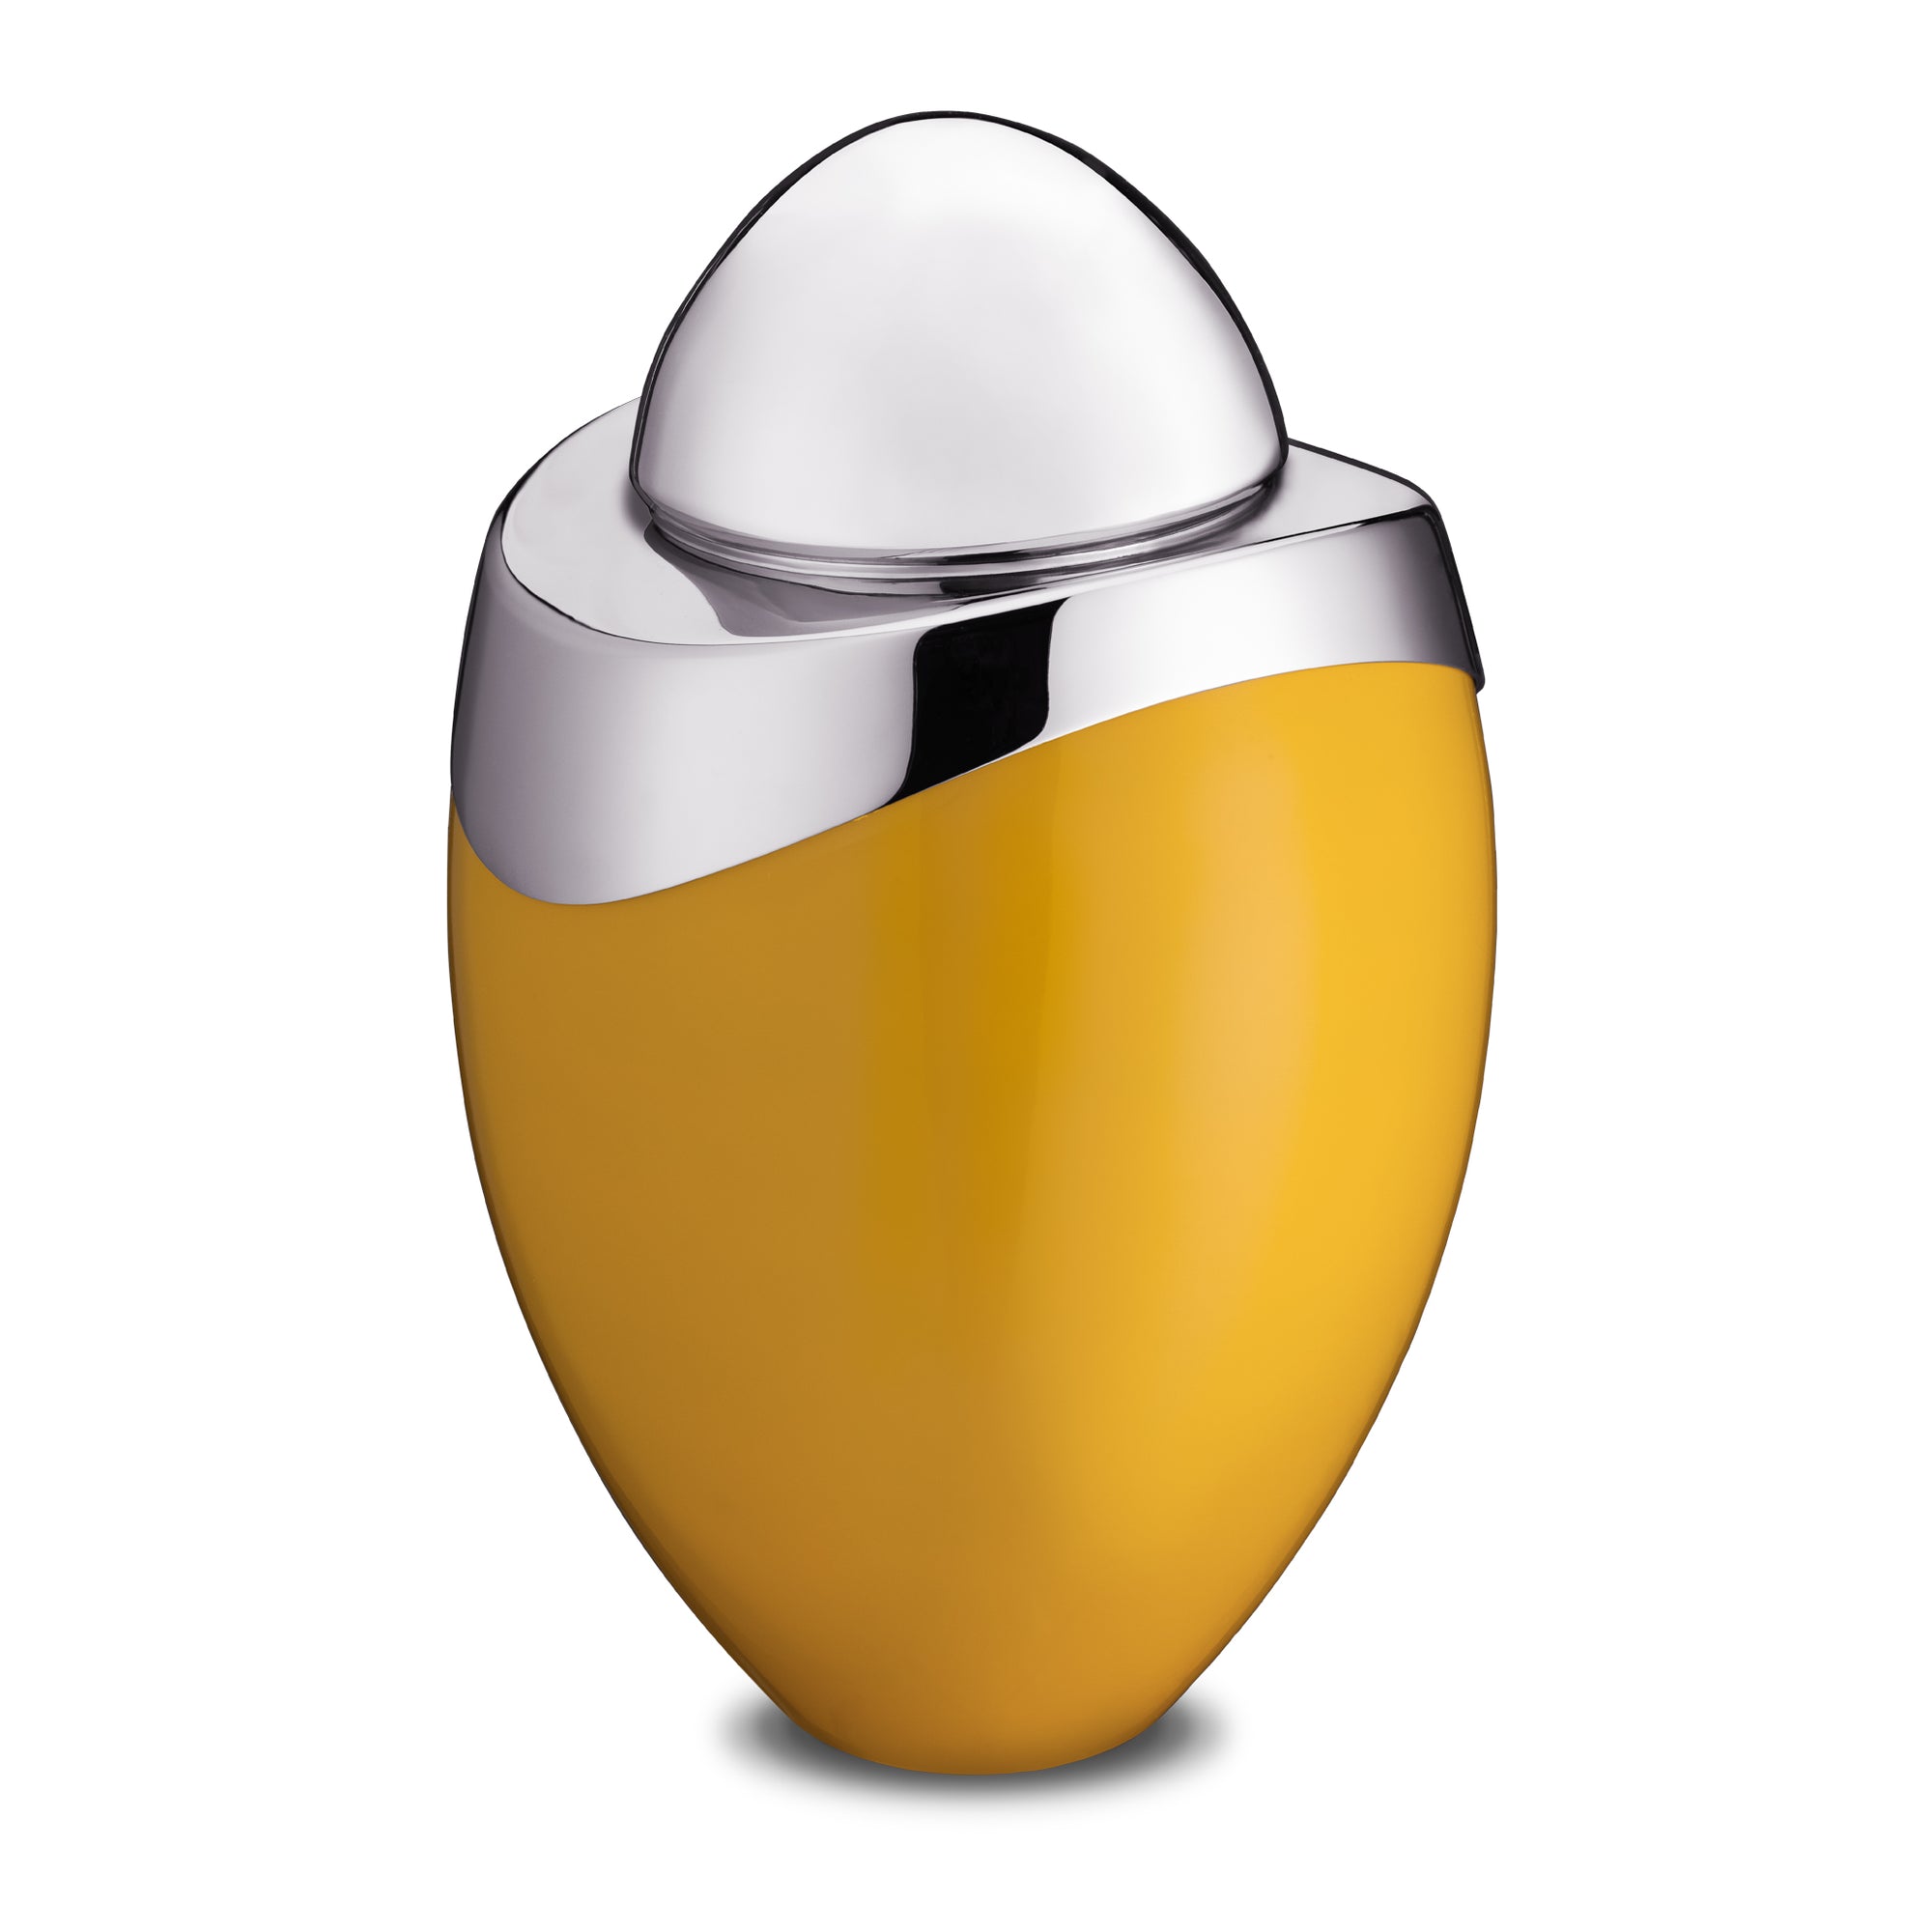 Amore Standard Adult Urn Yellow & Polished Silver